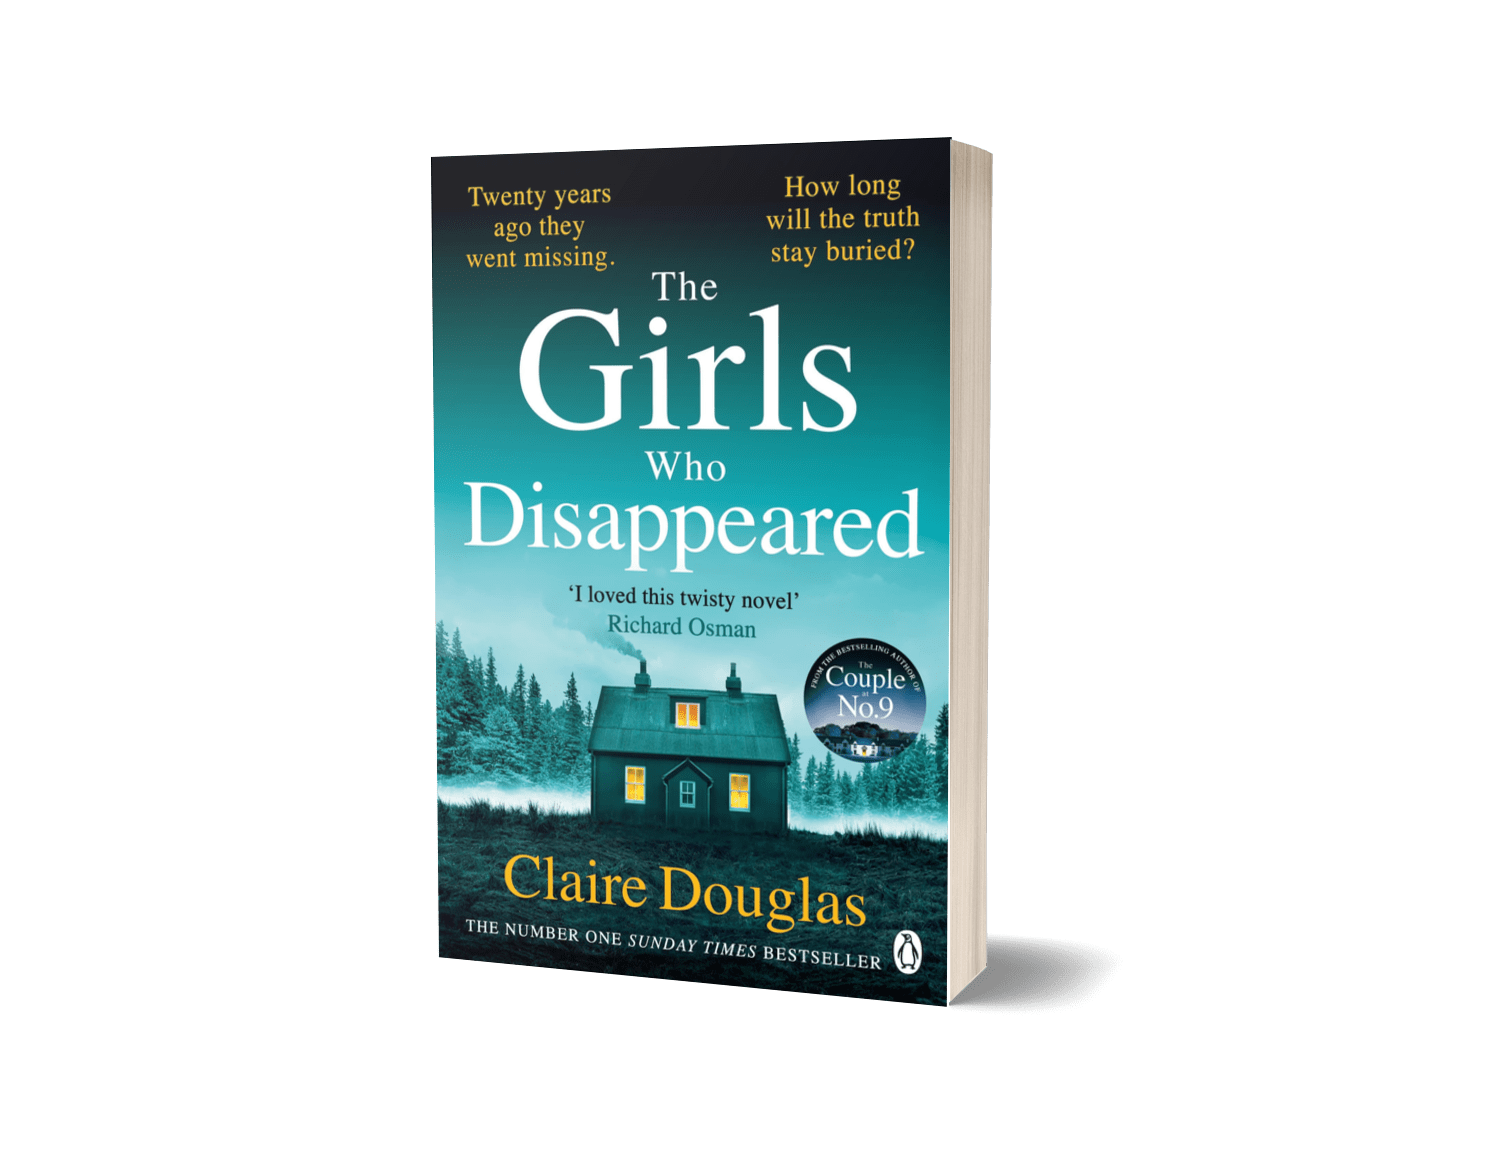 The Girls Who Disappeared By Claire Douglas